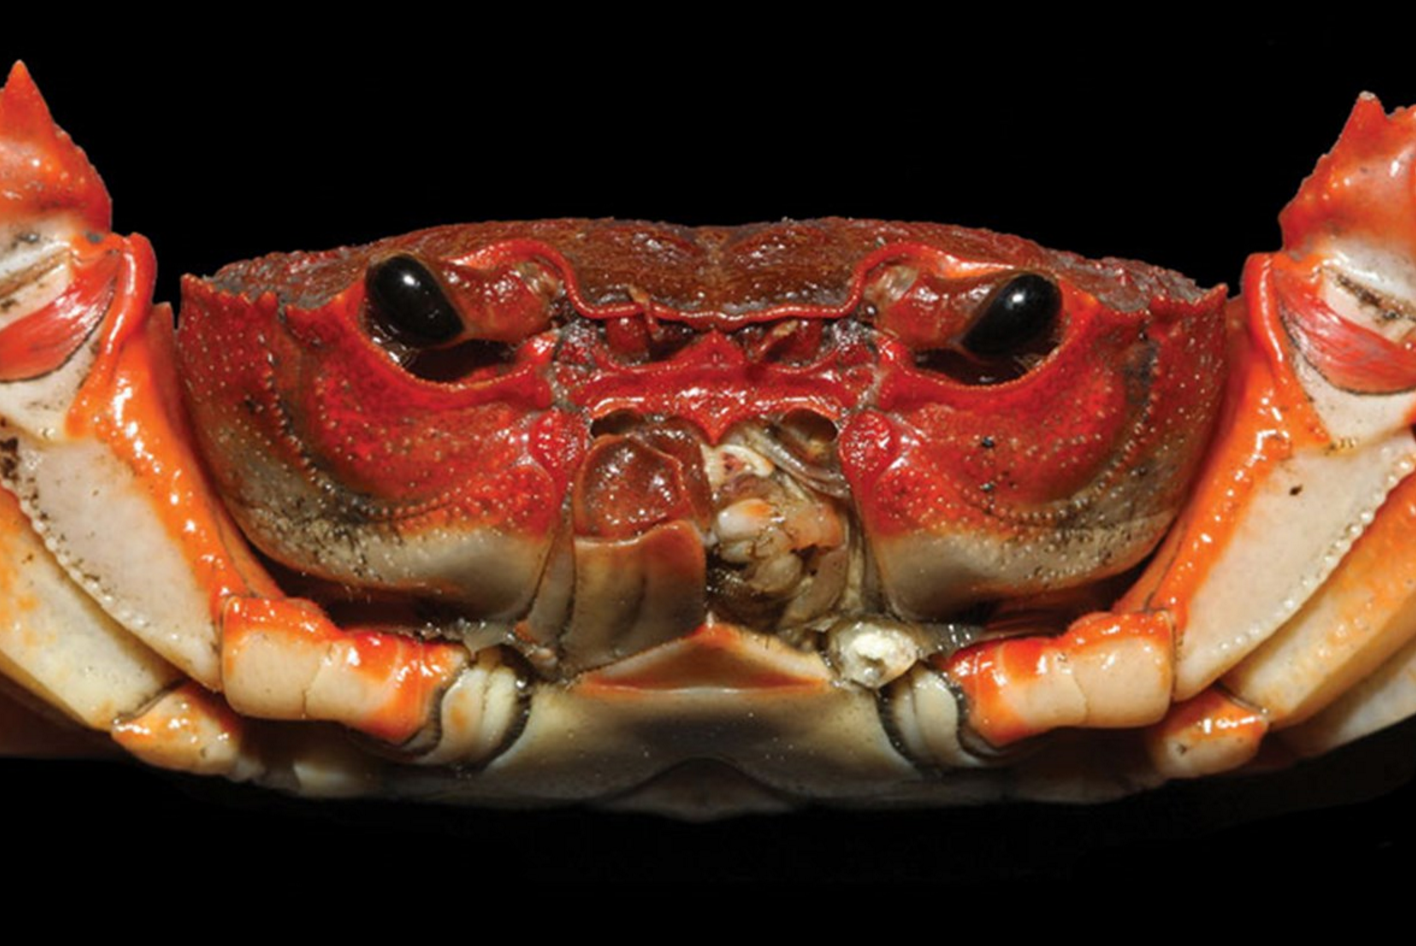 New Crab Species Discovered at Market Highlights Problems With Unregulated Fishing Industry